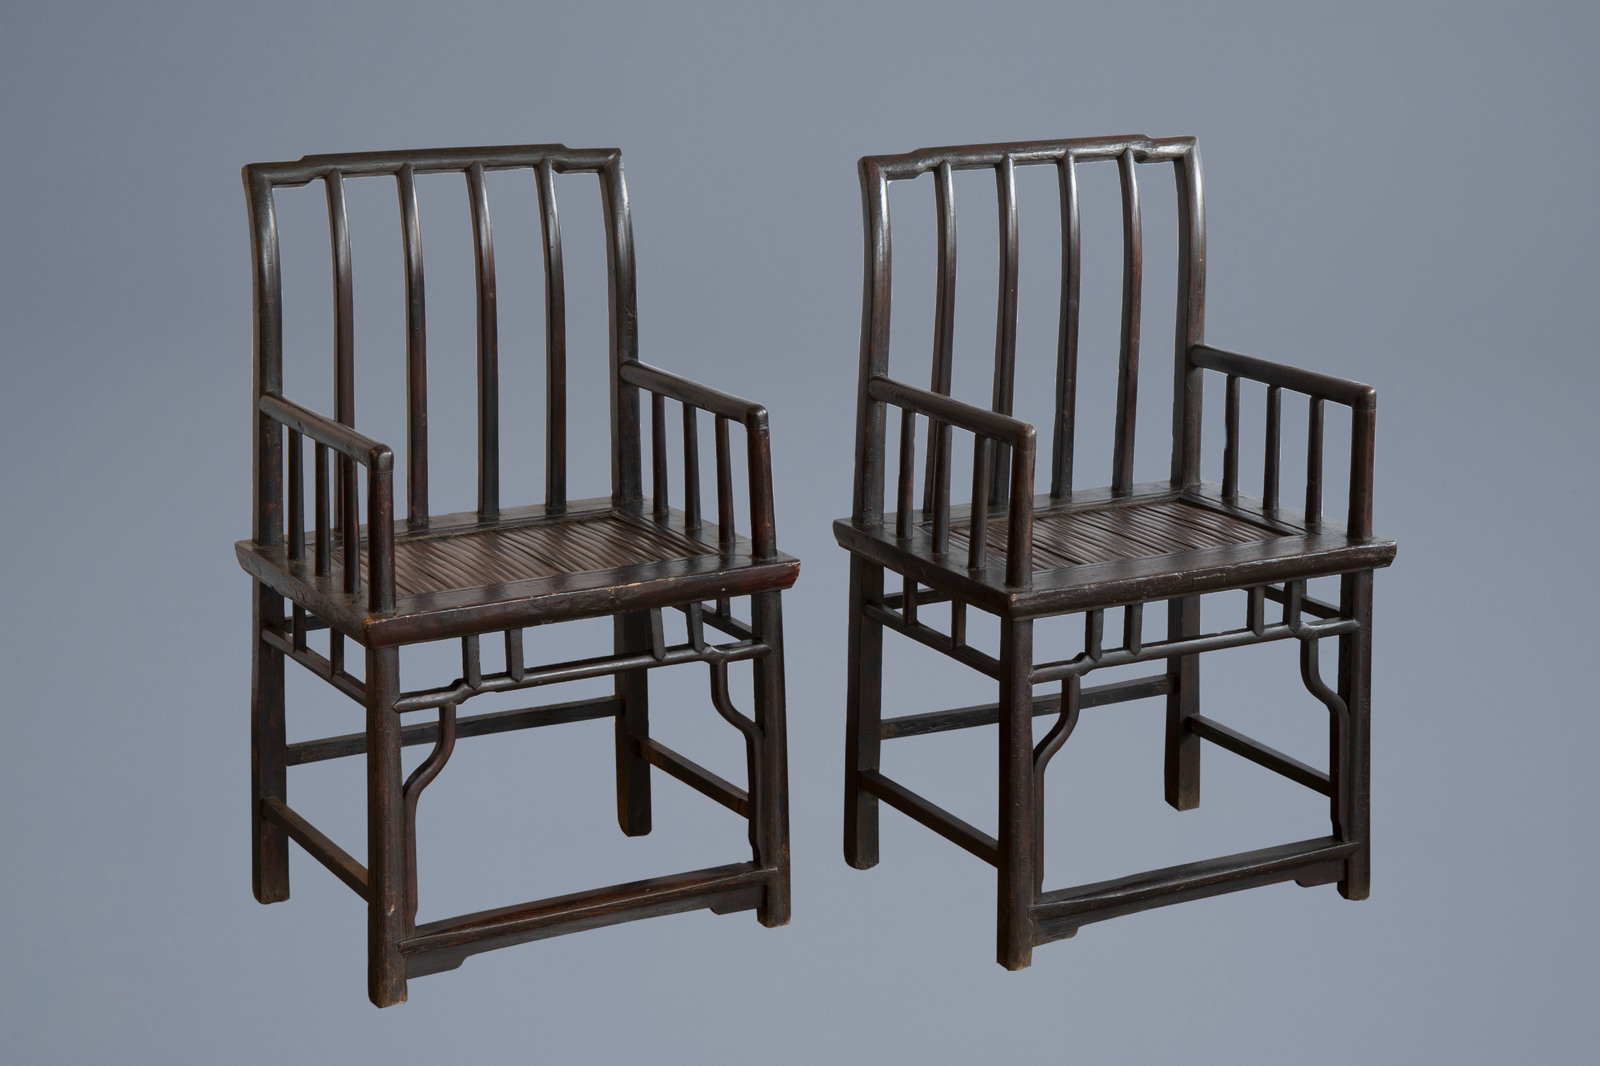 A pair of Chinese lacquered wooden chairs, first half of the 20th C.